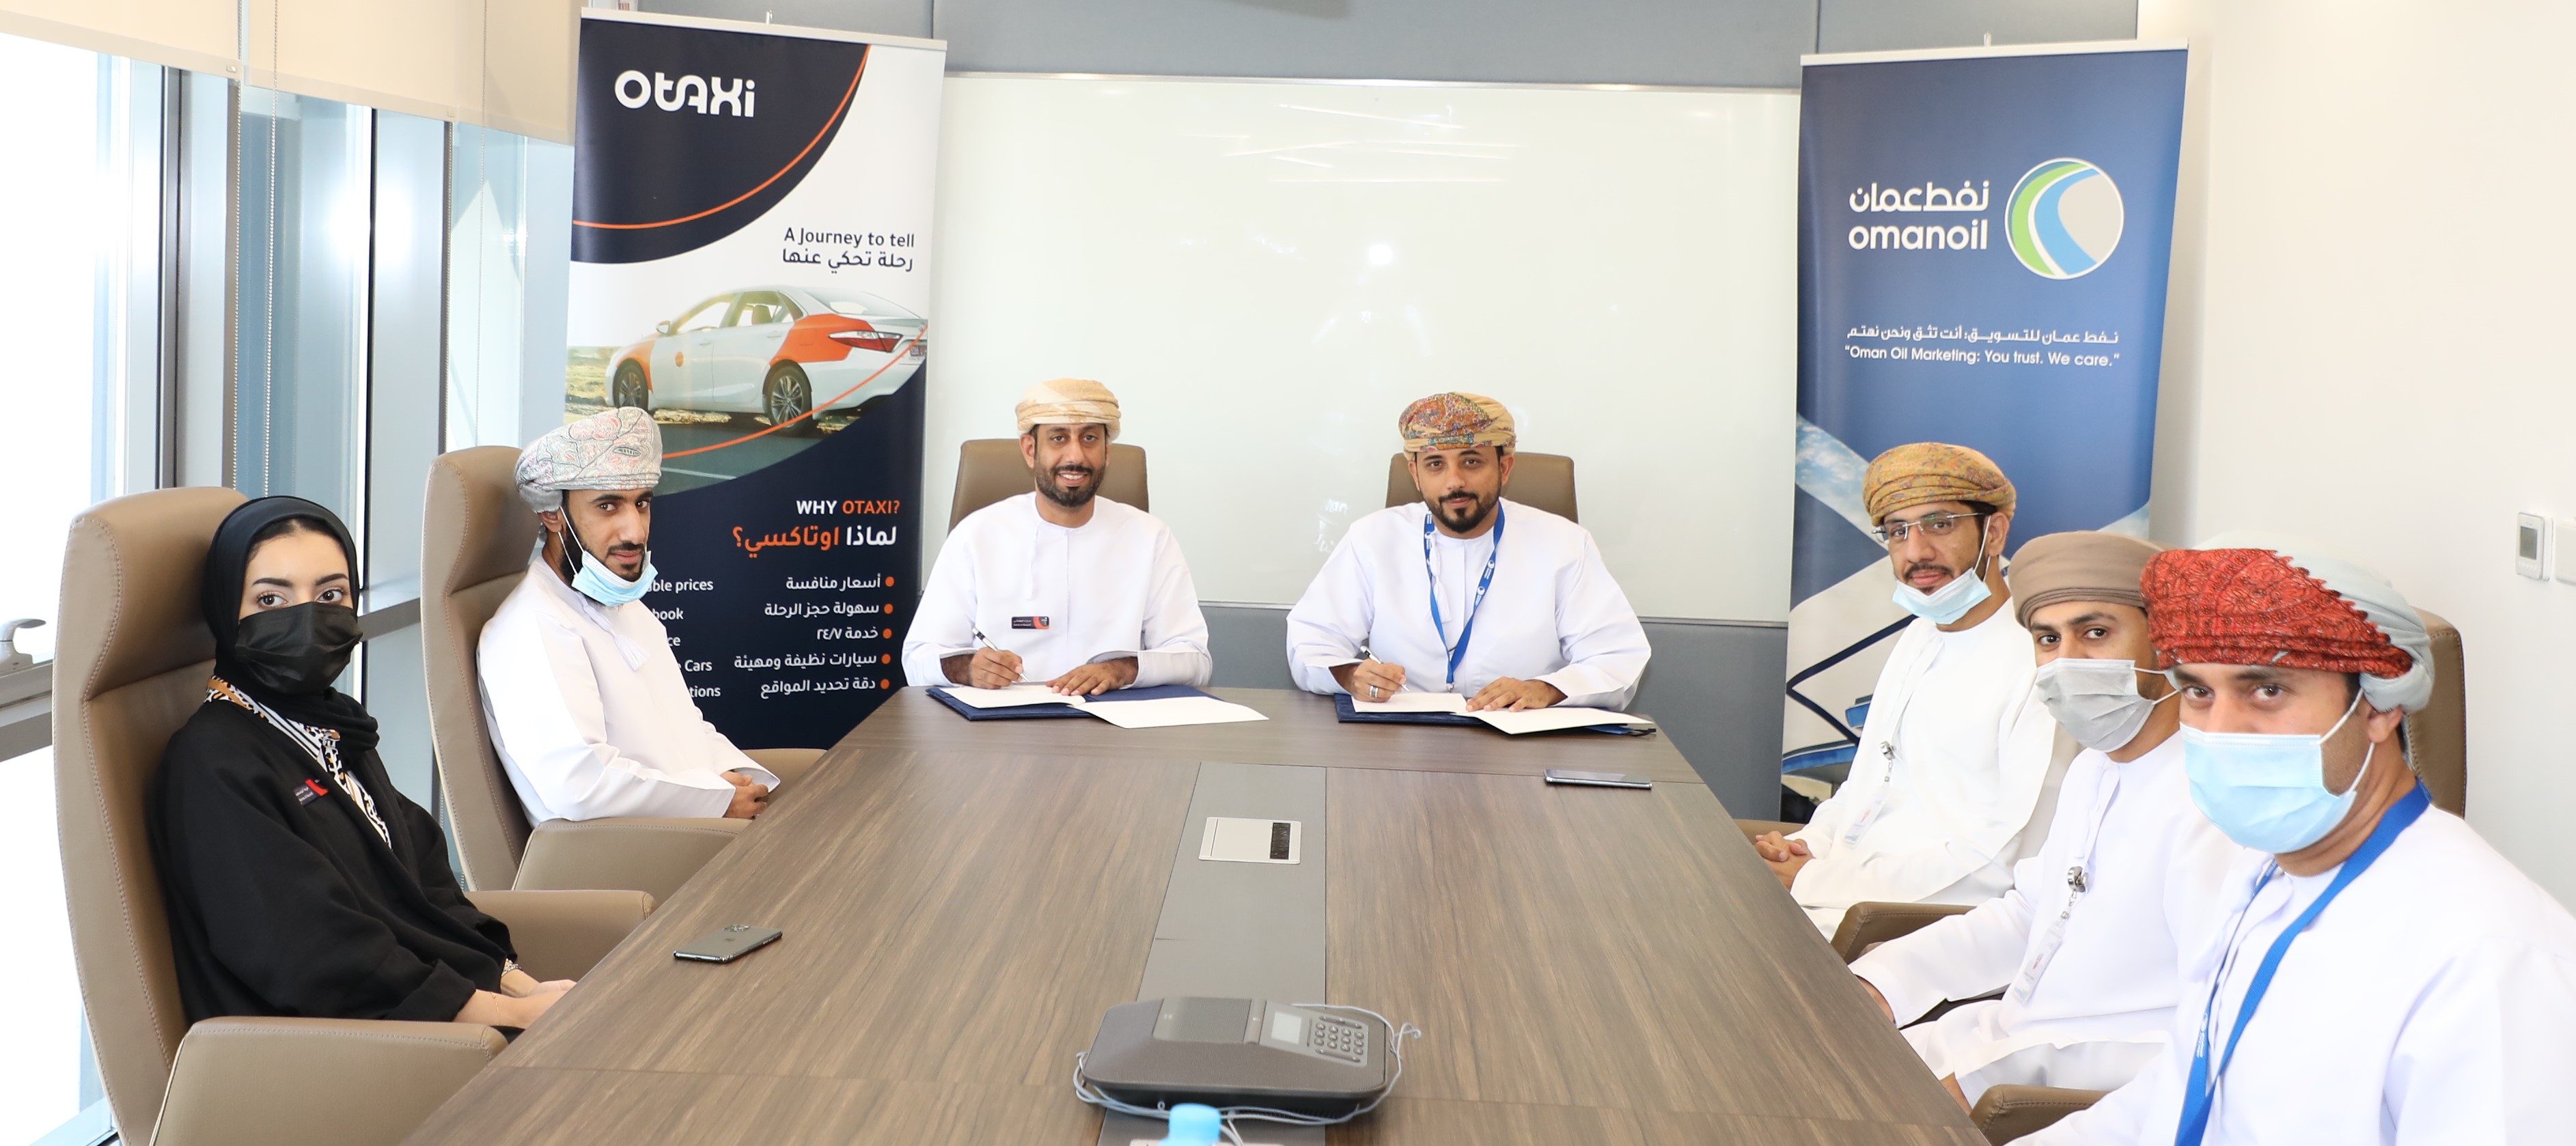 Oman Oil Marketing Company - MoU with OTaxi